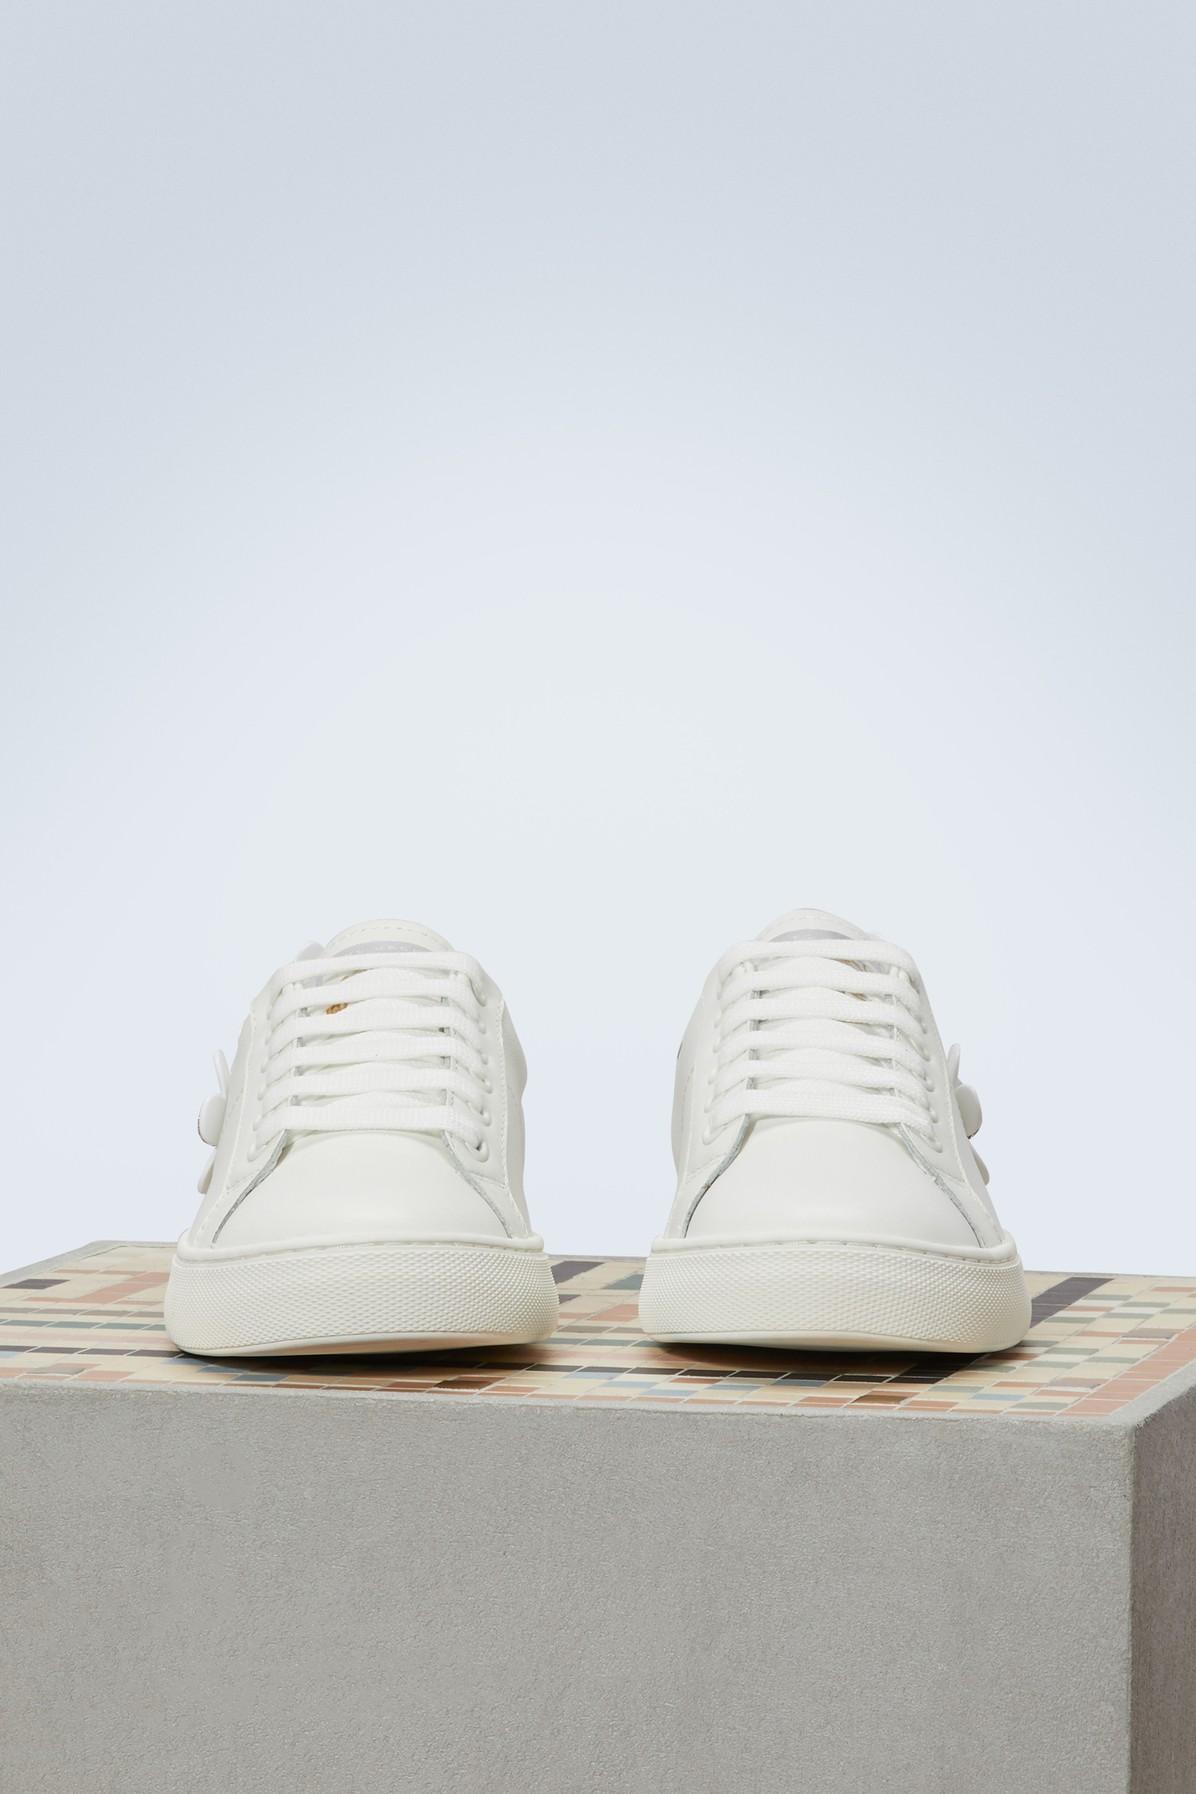 Marc Jacobs Daisy Embellished Leather Sneakers in White | Lyst